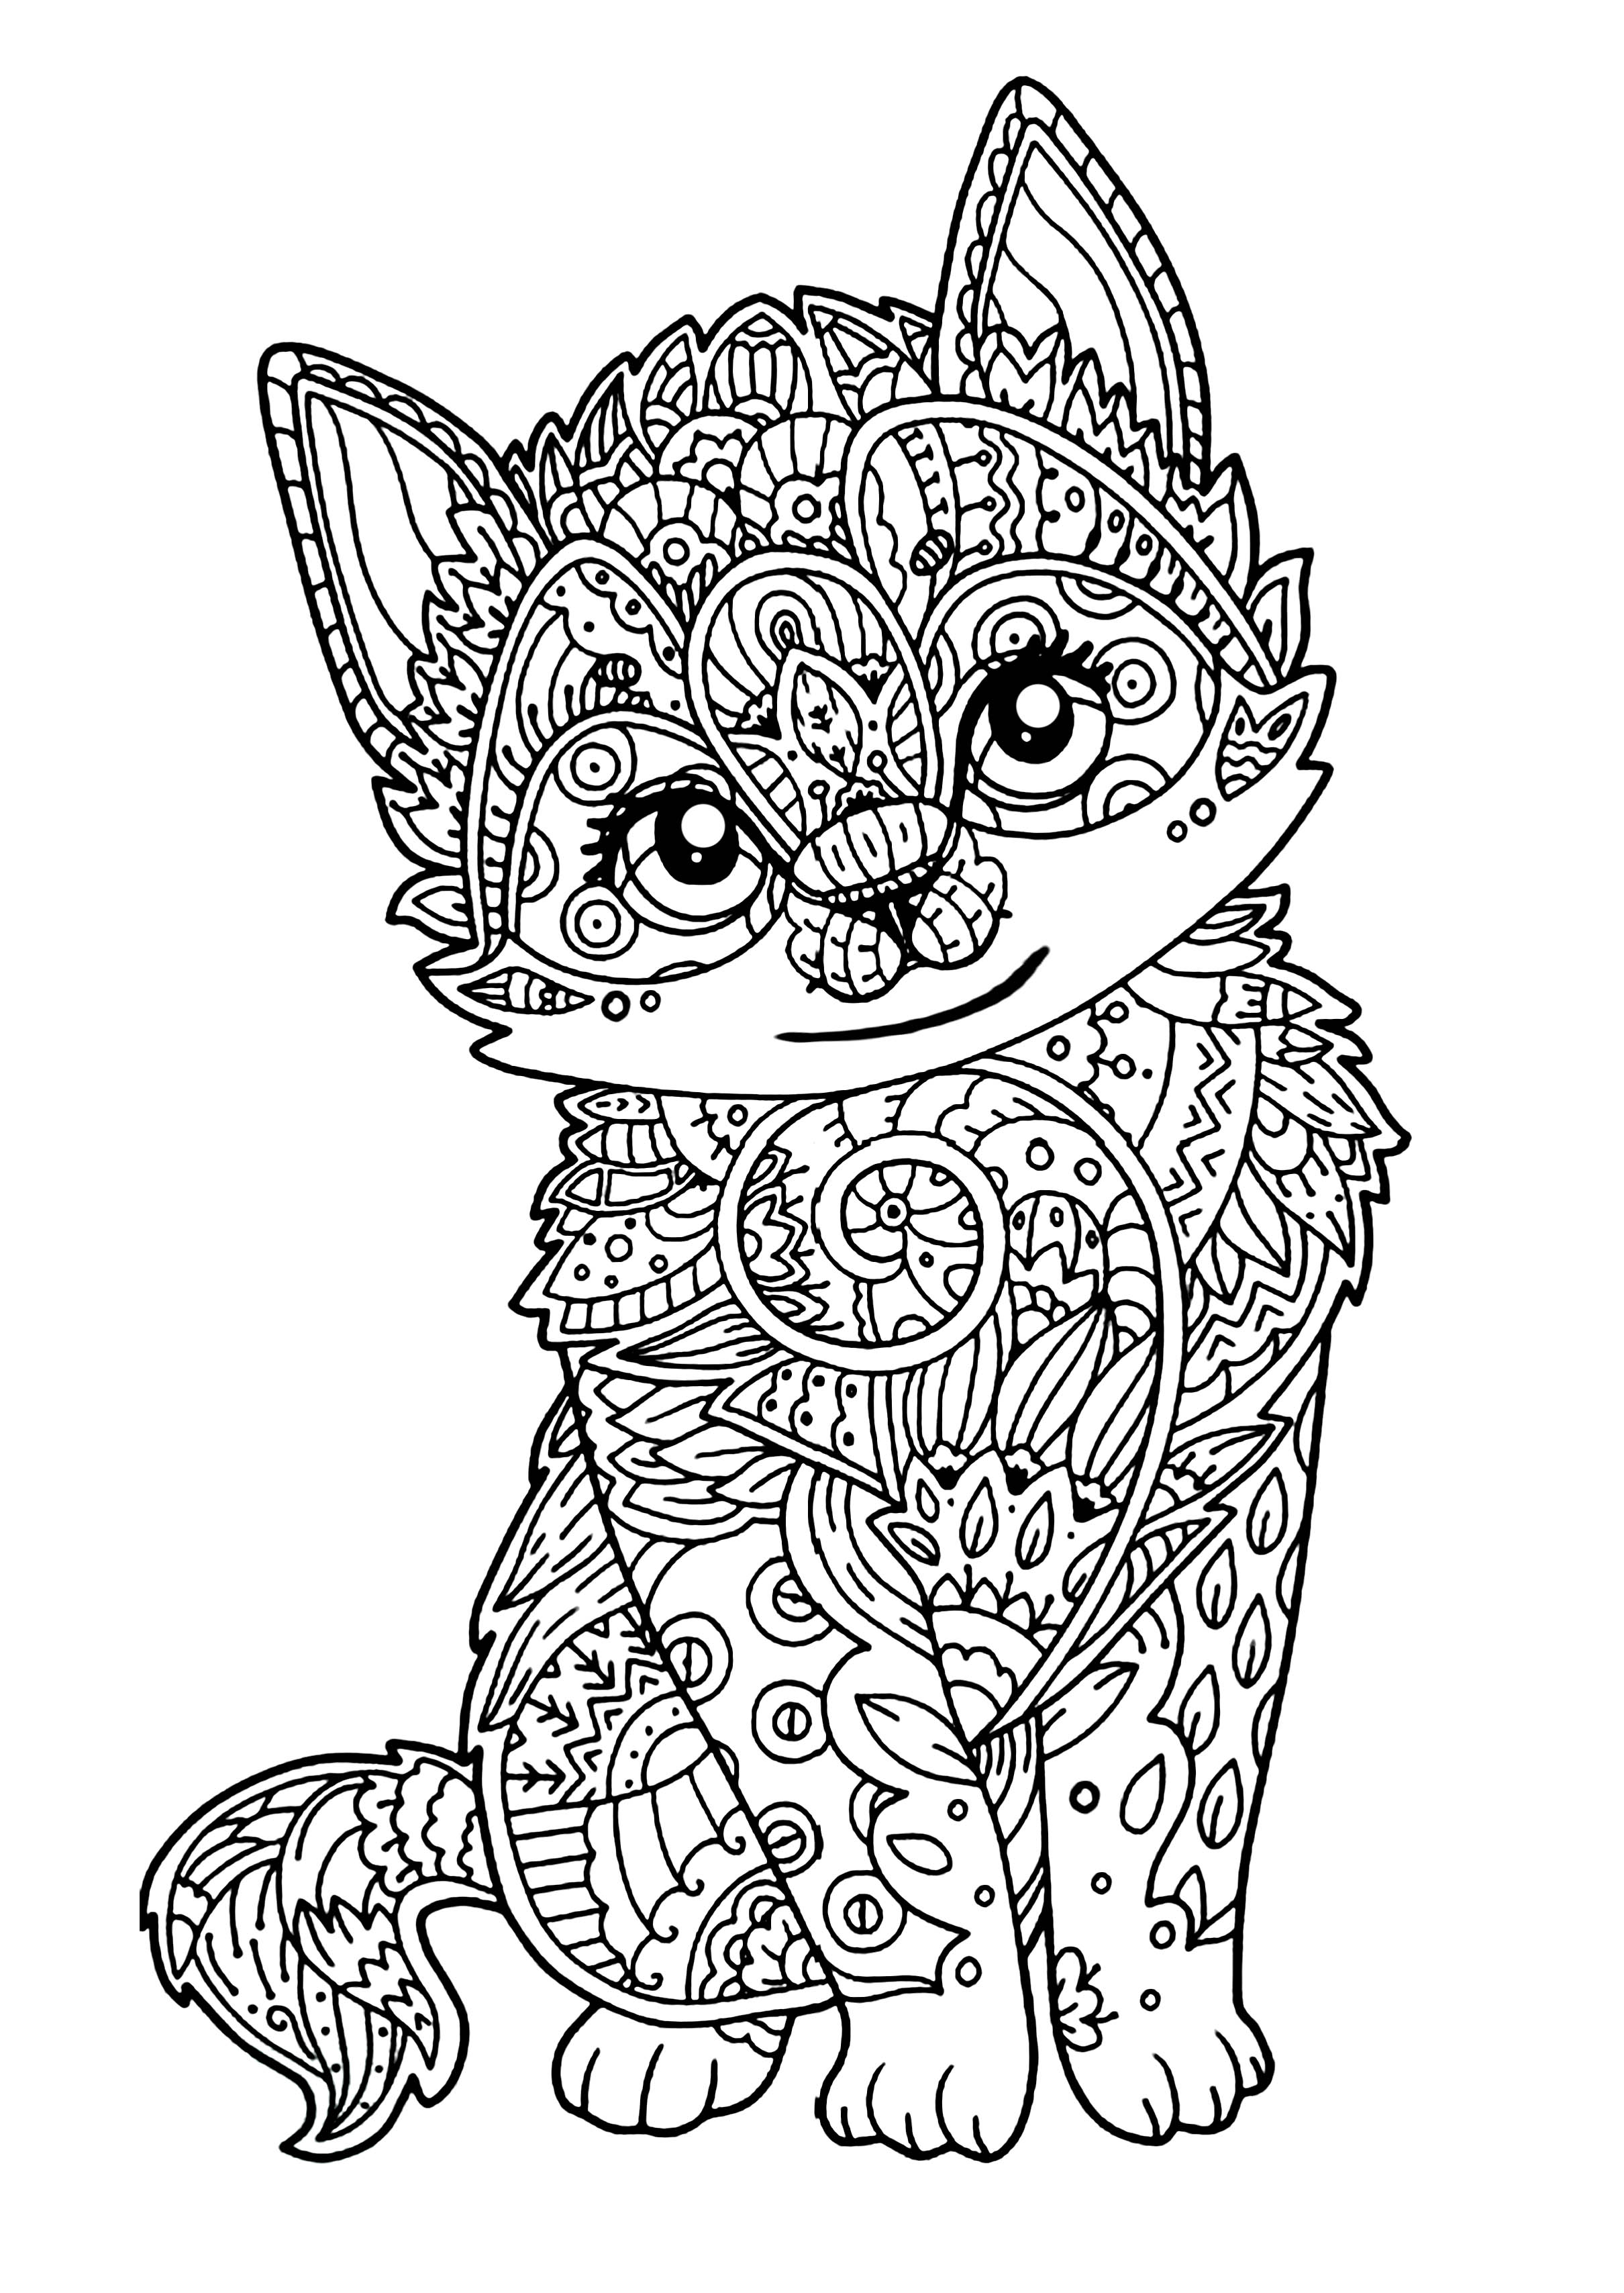 Cute kitten - Cats Adult Coloring Pages